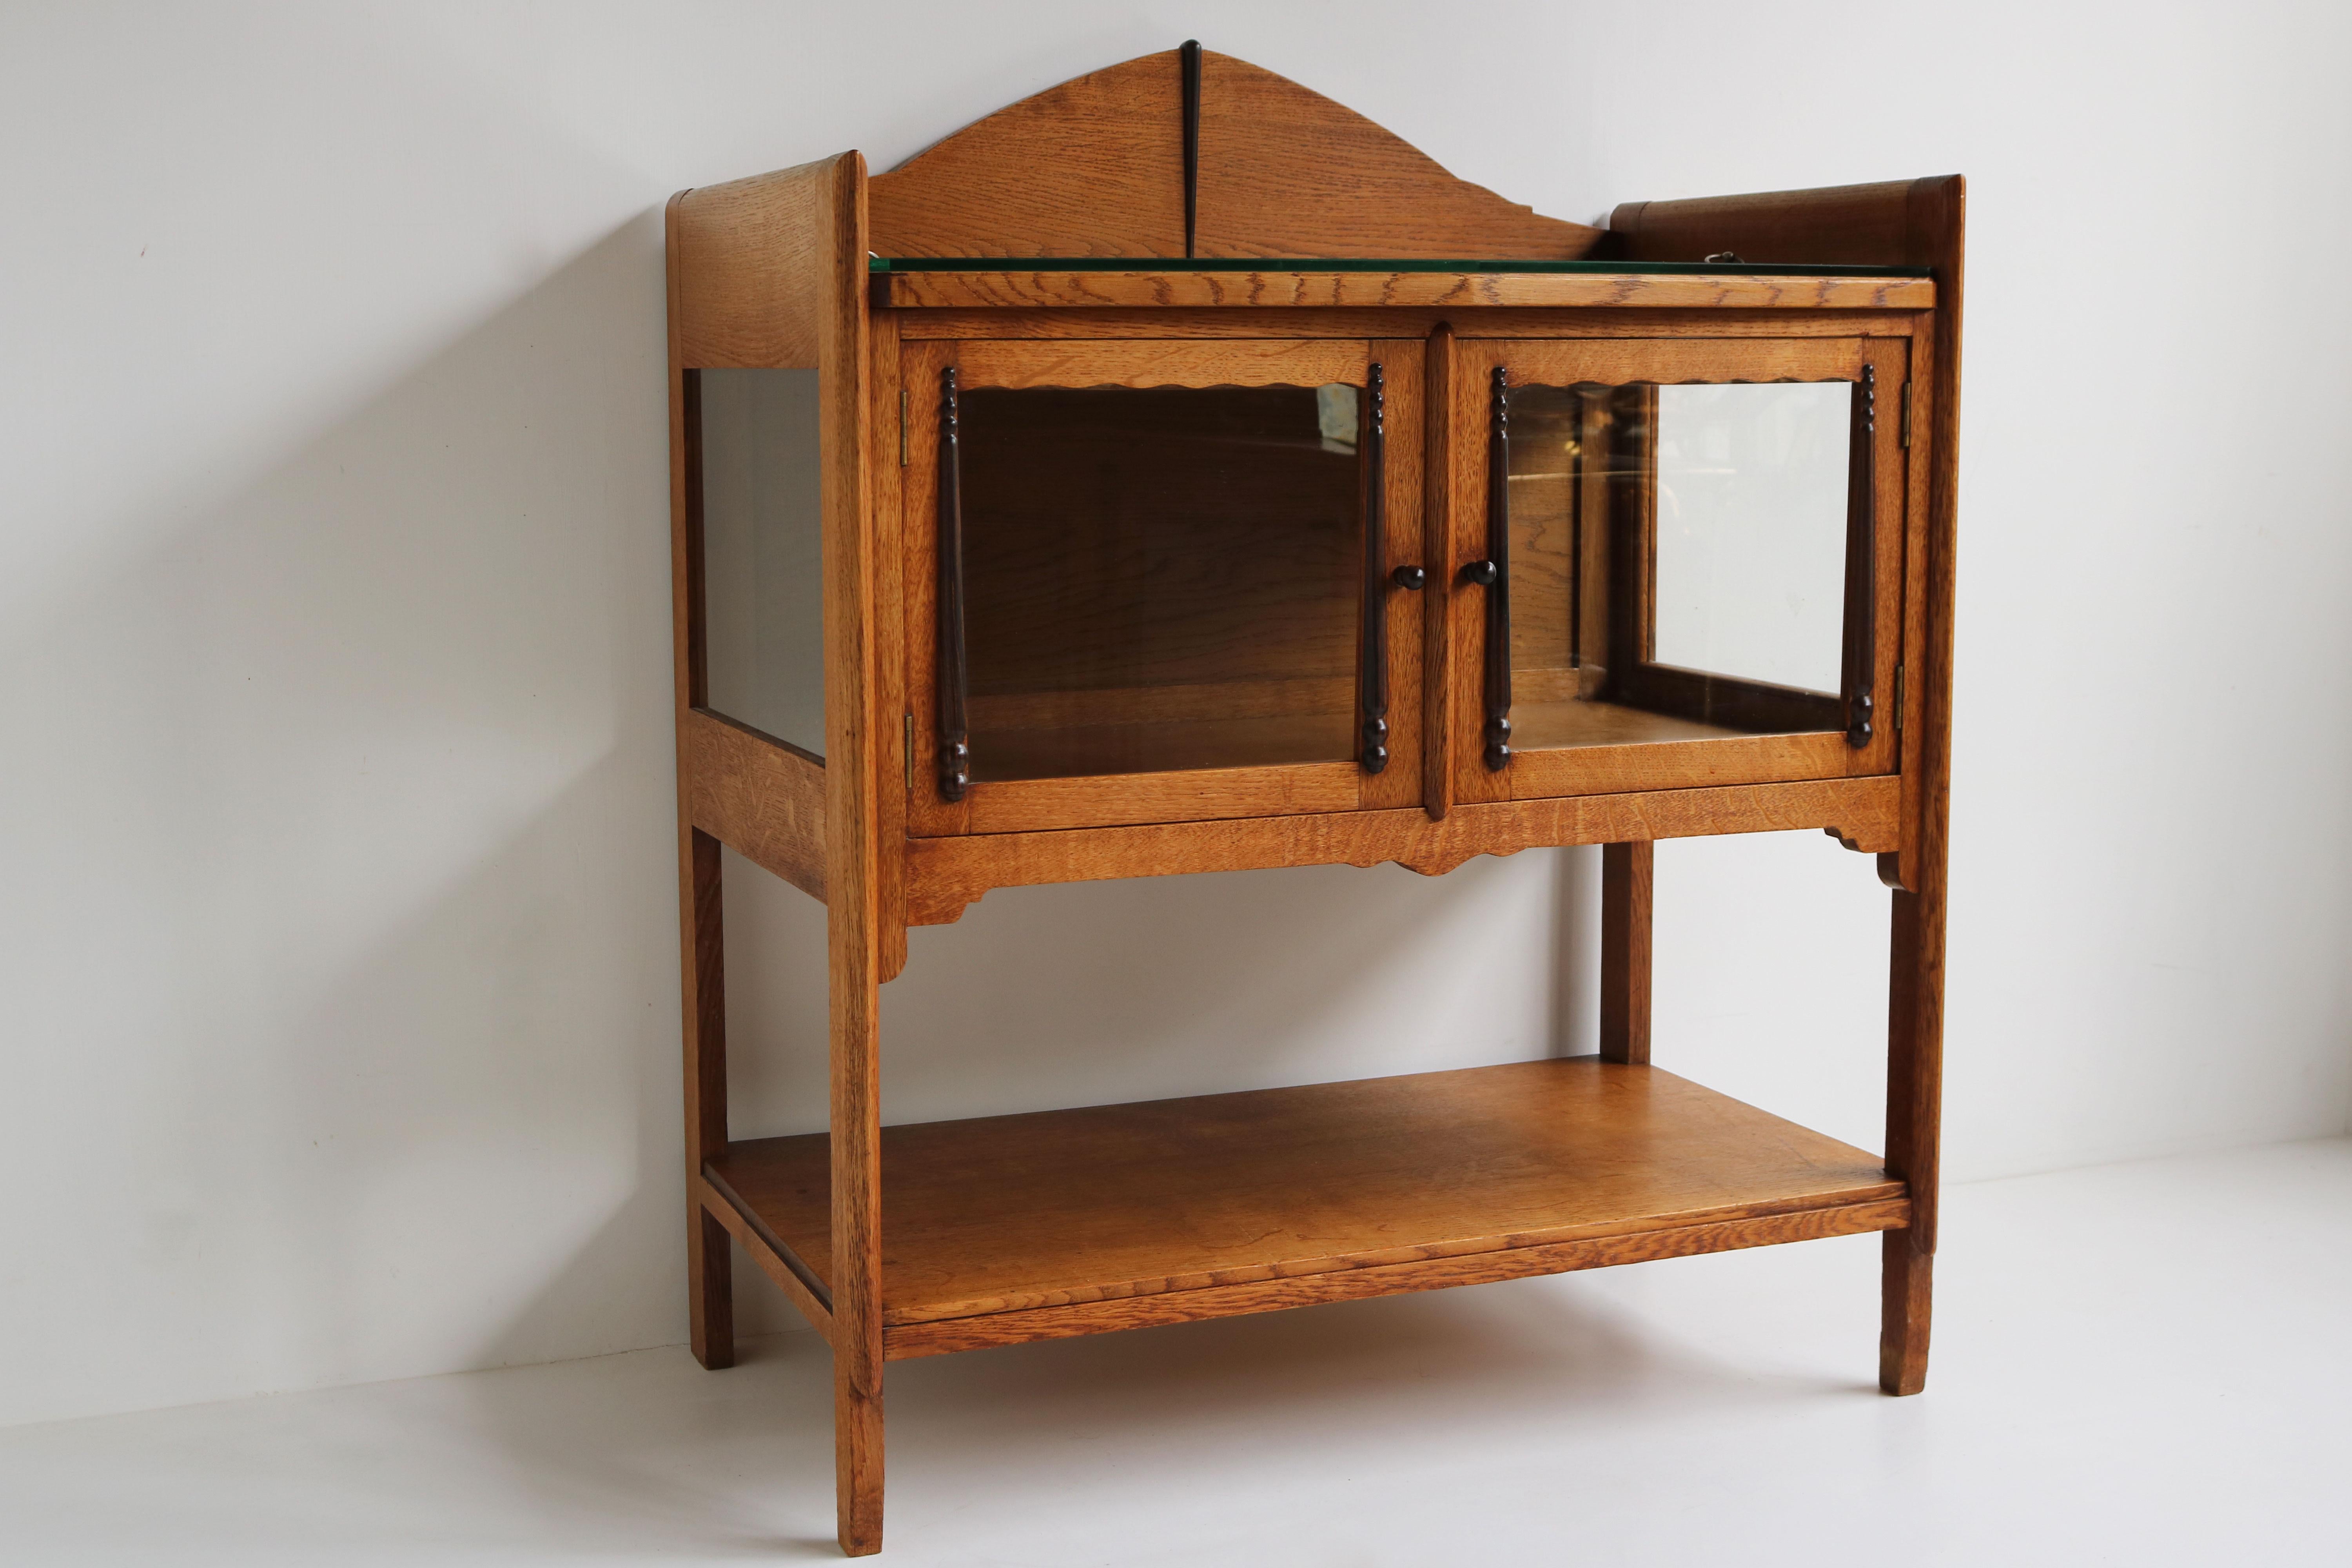 Gorgeous Dutch antique Amsterdam School style tea cabinet. Striking Dutch Art Deco design from the 1920s . 
The blonde oak looks amazing with the typical Amsterdam School Art Deco decorations in Macassar wood. 
The cabinet has glass on 3 sides & a